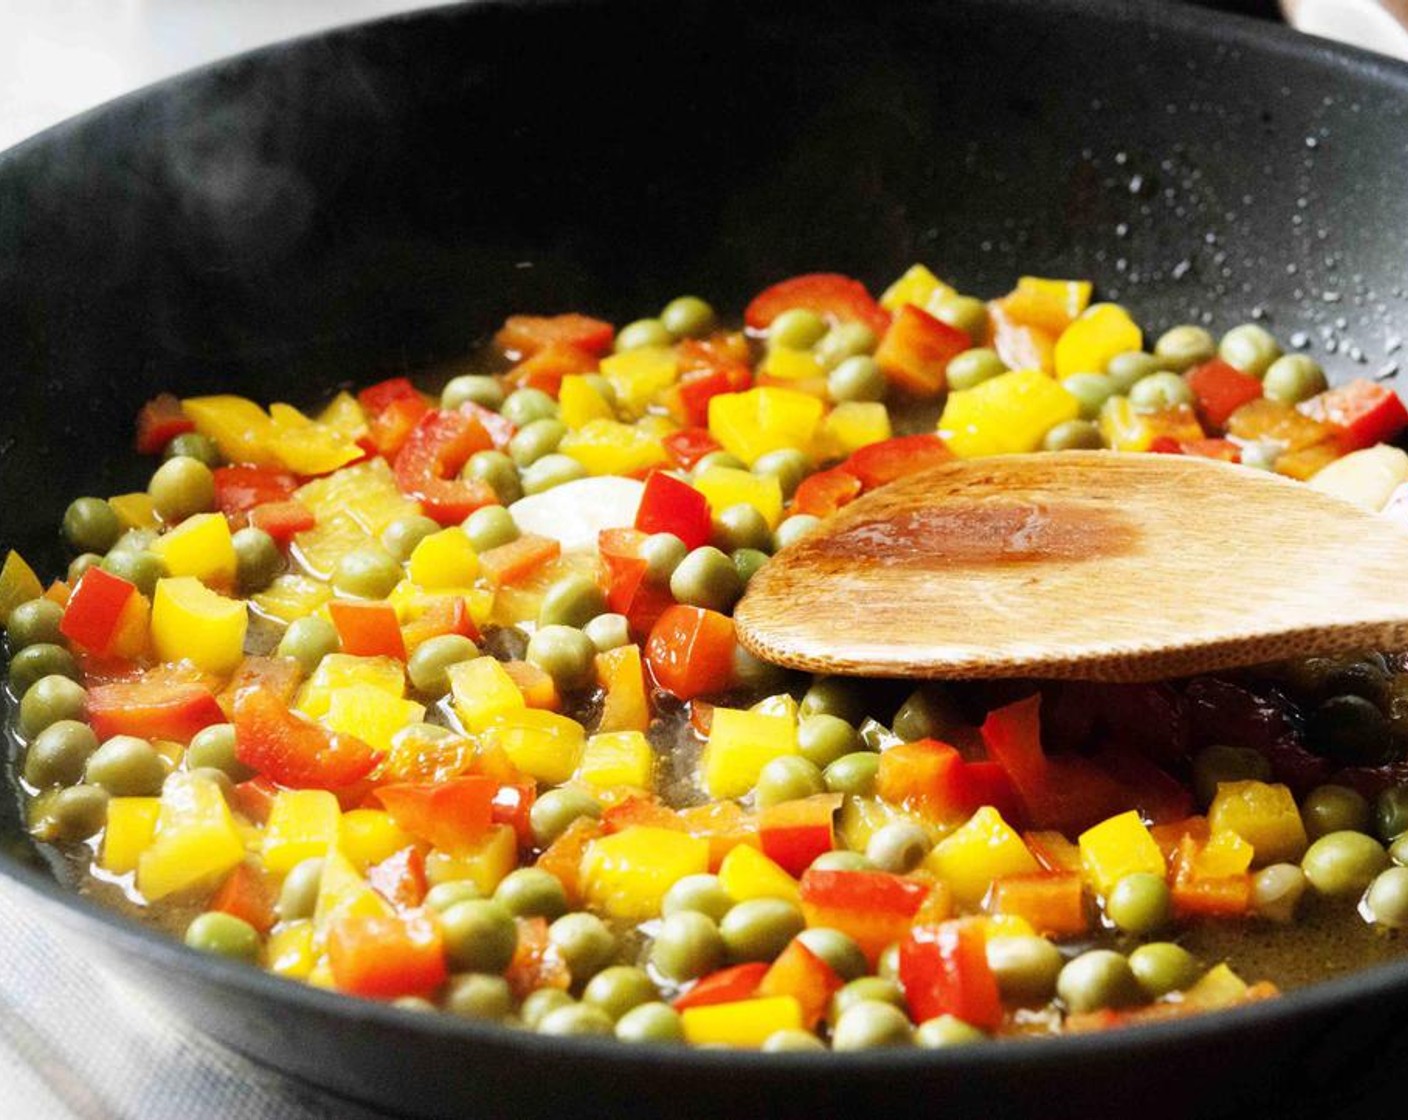 step 4 In a skillet heat Extra-Virgin Olive Oil (2 Tbsp) and sautee the Garlic (2 cloves) until golden in color. Add the diced bell peppers, season with Salt (to taste) and Ground Black Pepper (to taste), and cook on medium-low with a lid on for about 10 min. Add the Green Peas (1/2 cup) and cook for 5 more minutes.